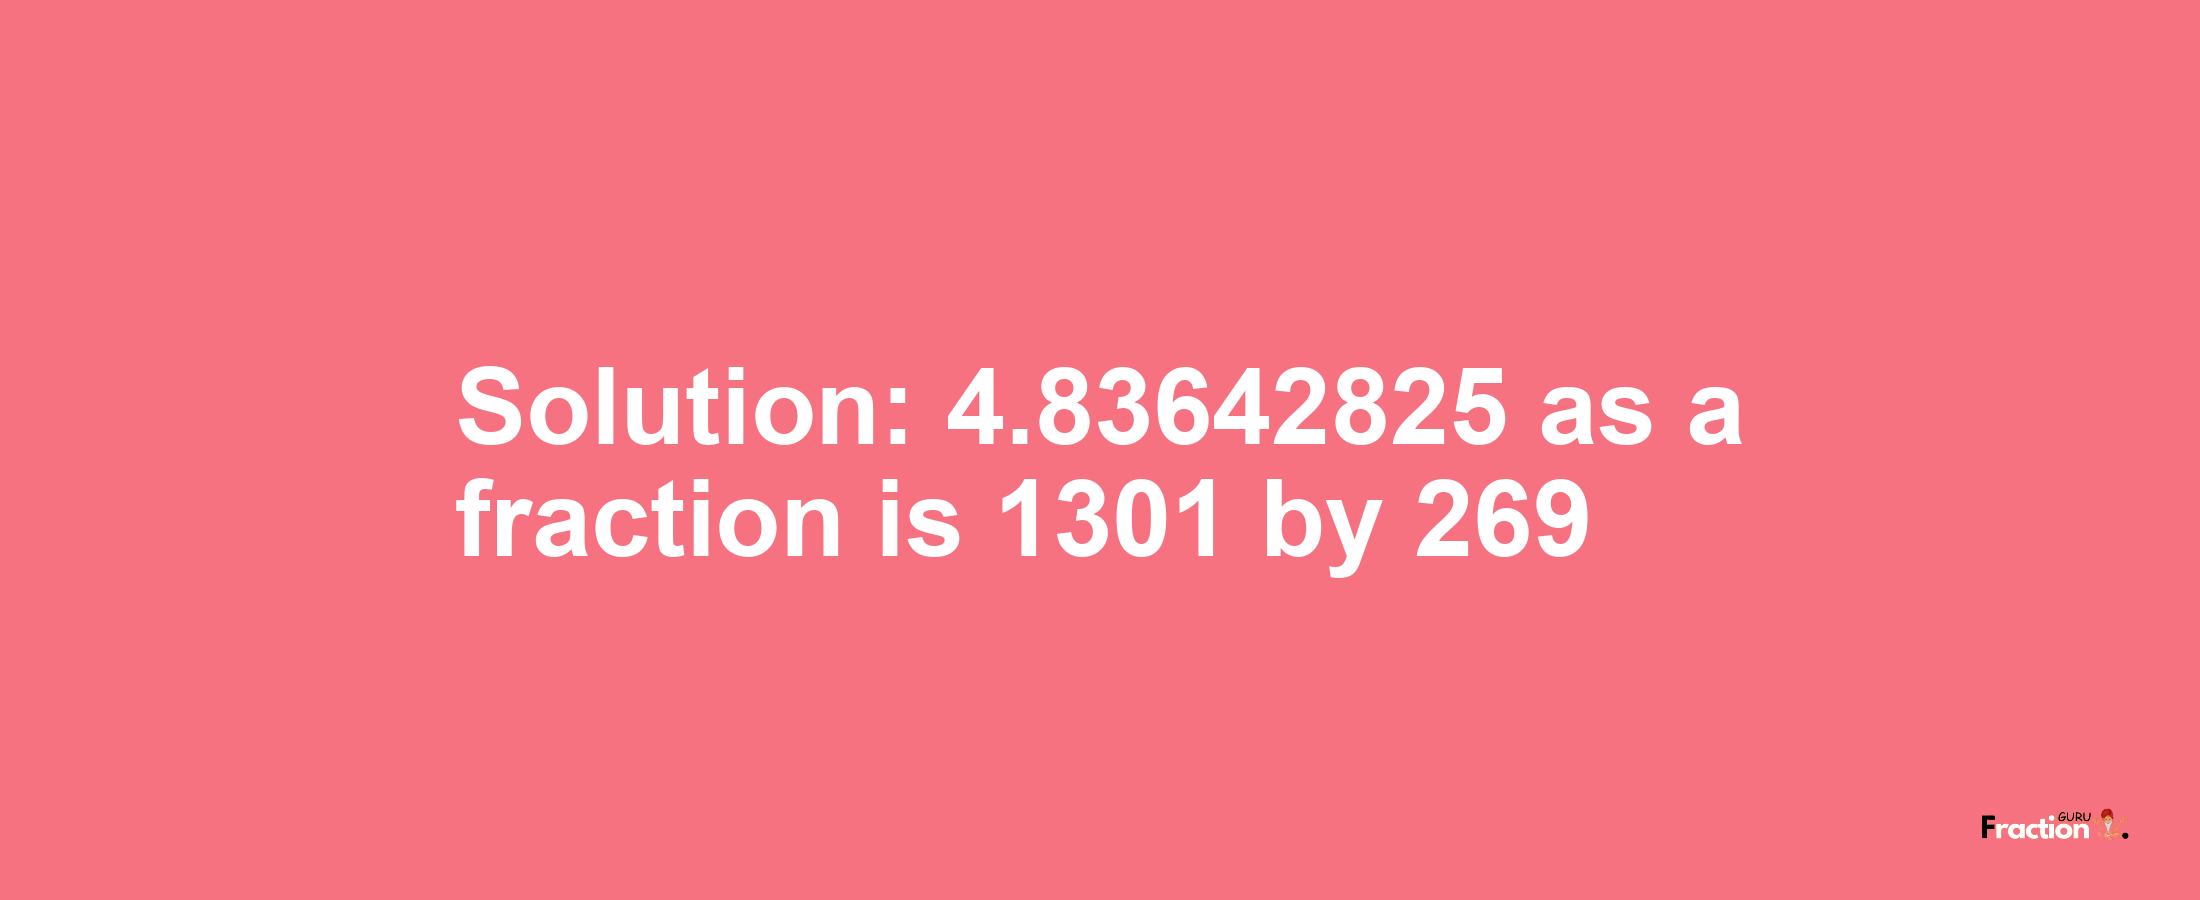 Solution:4.83642825 as a fraction is 1301/269